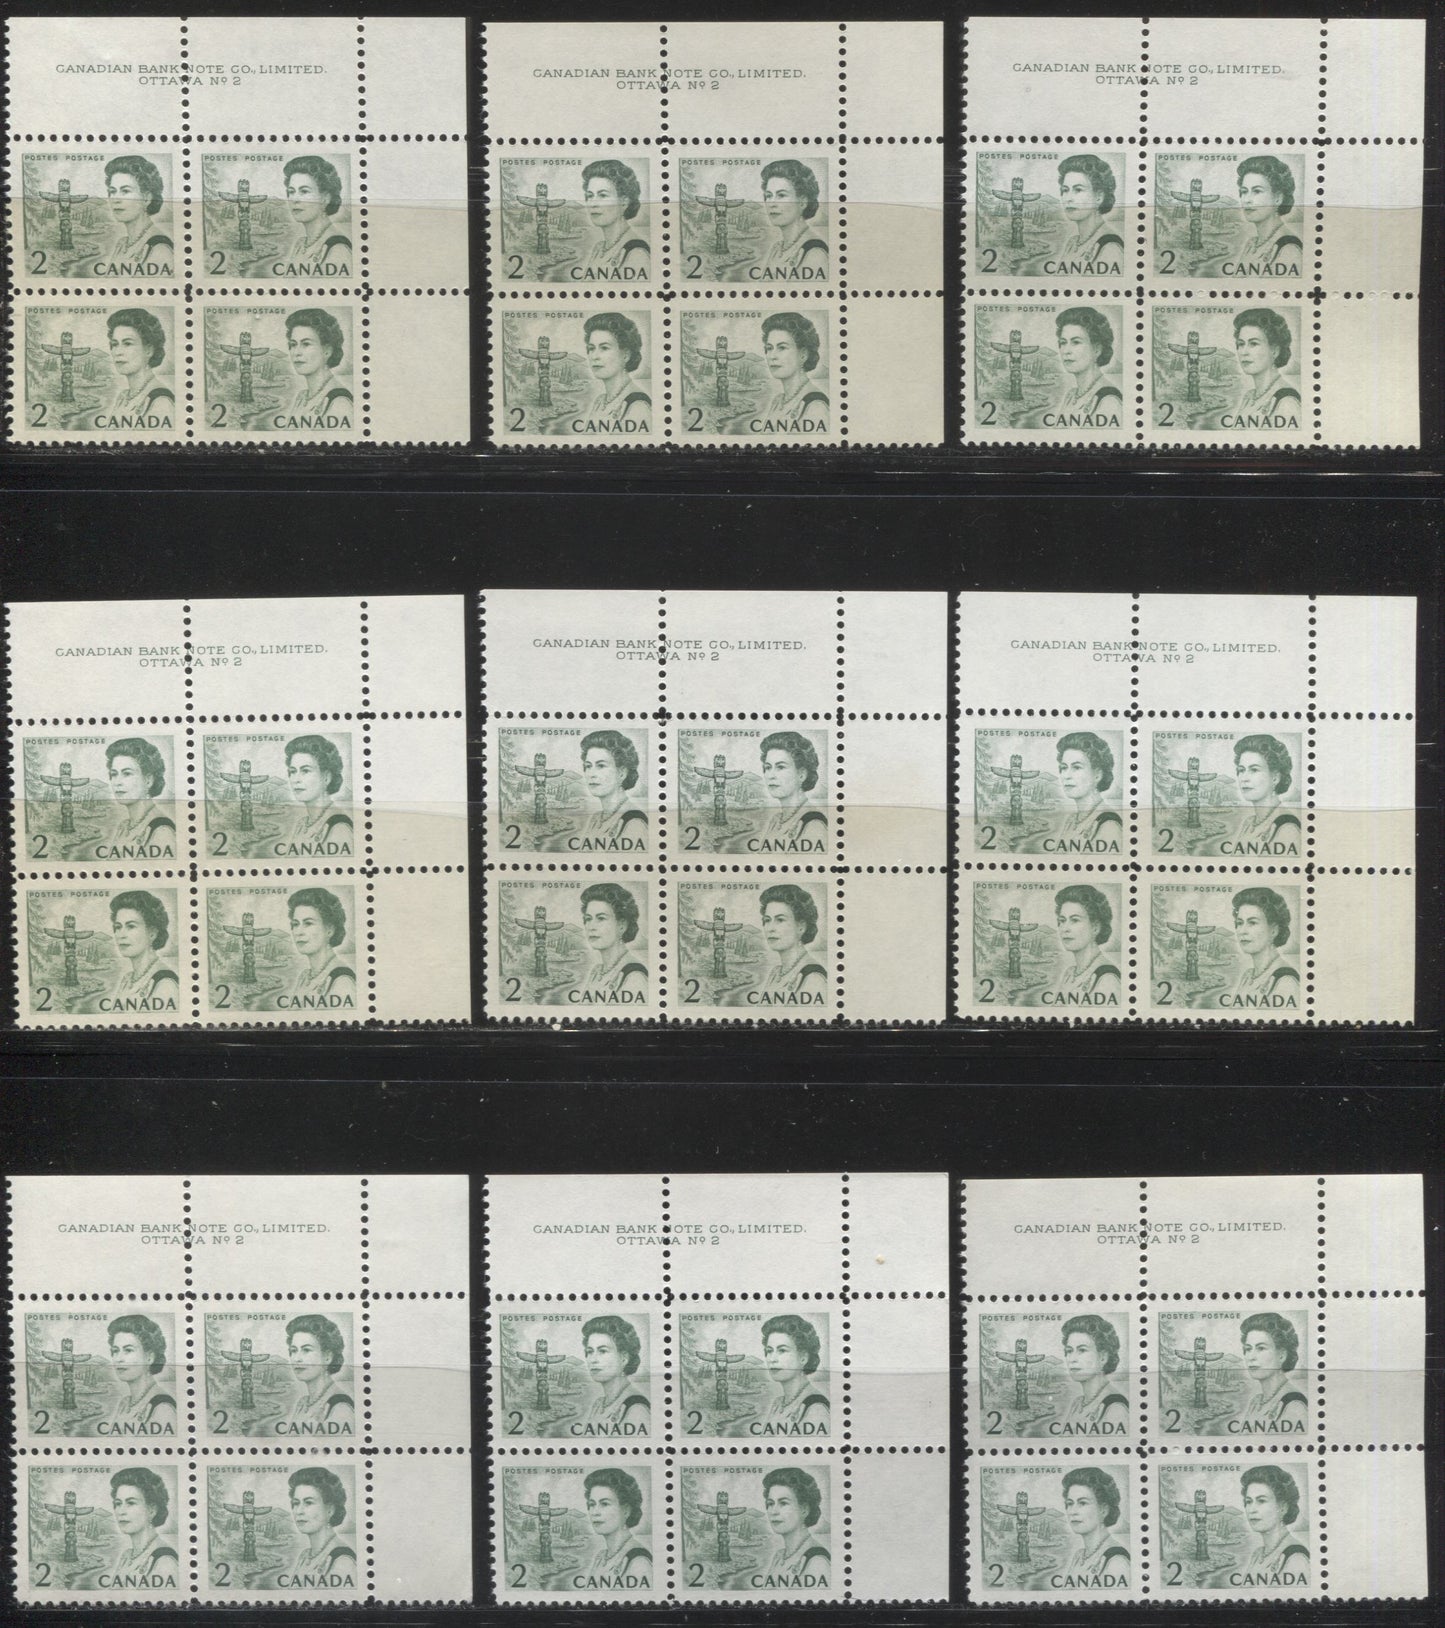 Lot #161 Canada #455, 455iv 2c Green, Deep Green, Bright Green & Deep Bright Green, Pacific Coast Totem Pole, 1967-1973 Centennial Issue, A Specialized Lot of Plate 2 UR Blocks on DF and NF Papers